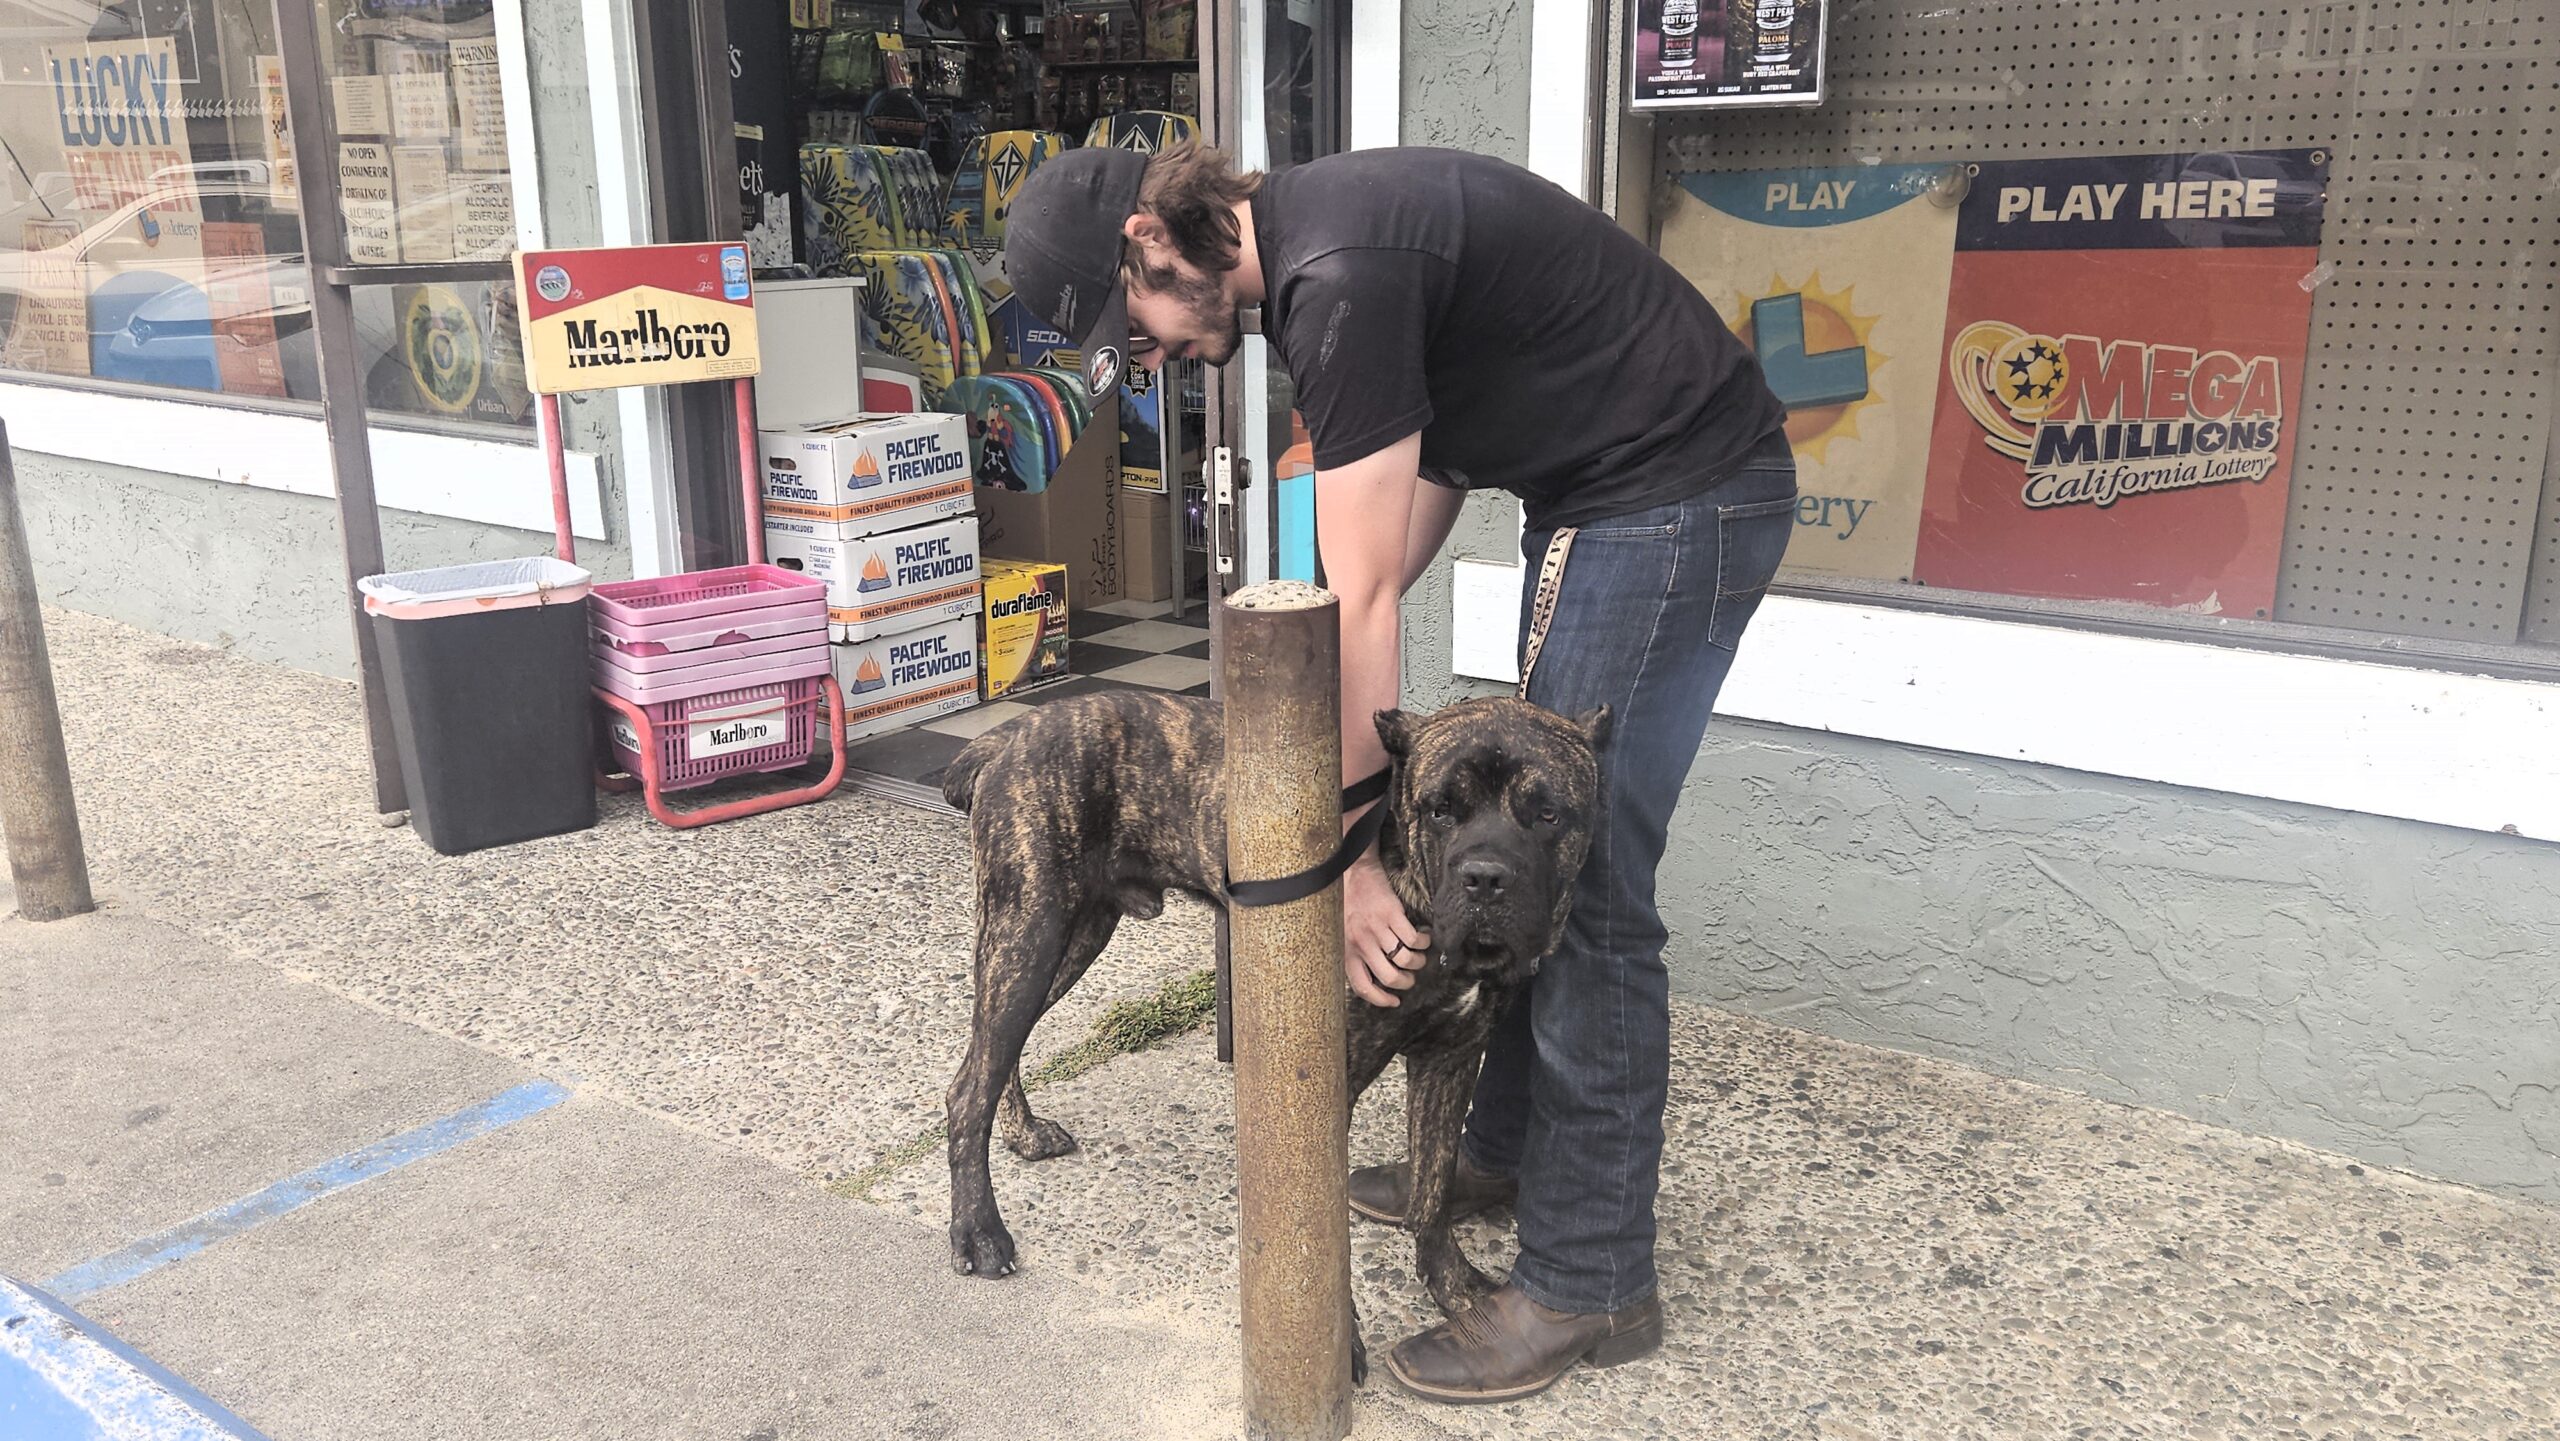 A man wearing a black shirt reaches down and pets a large brindle dog who's leash is wrapped around a pole outside of a store.